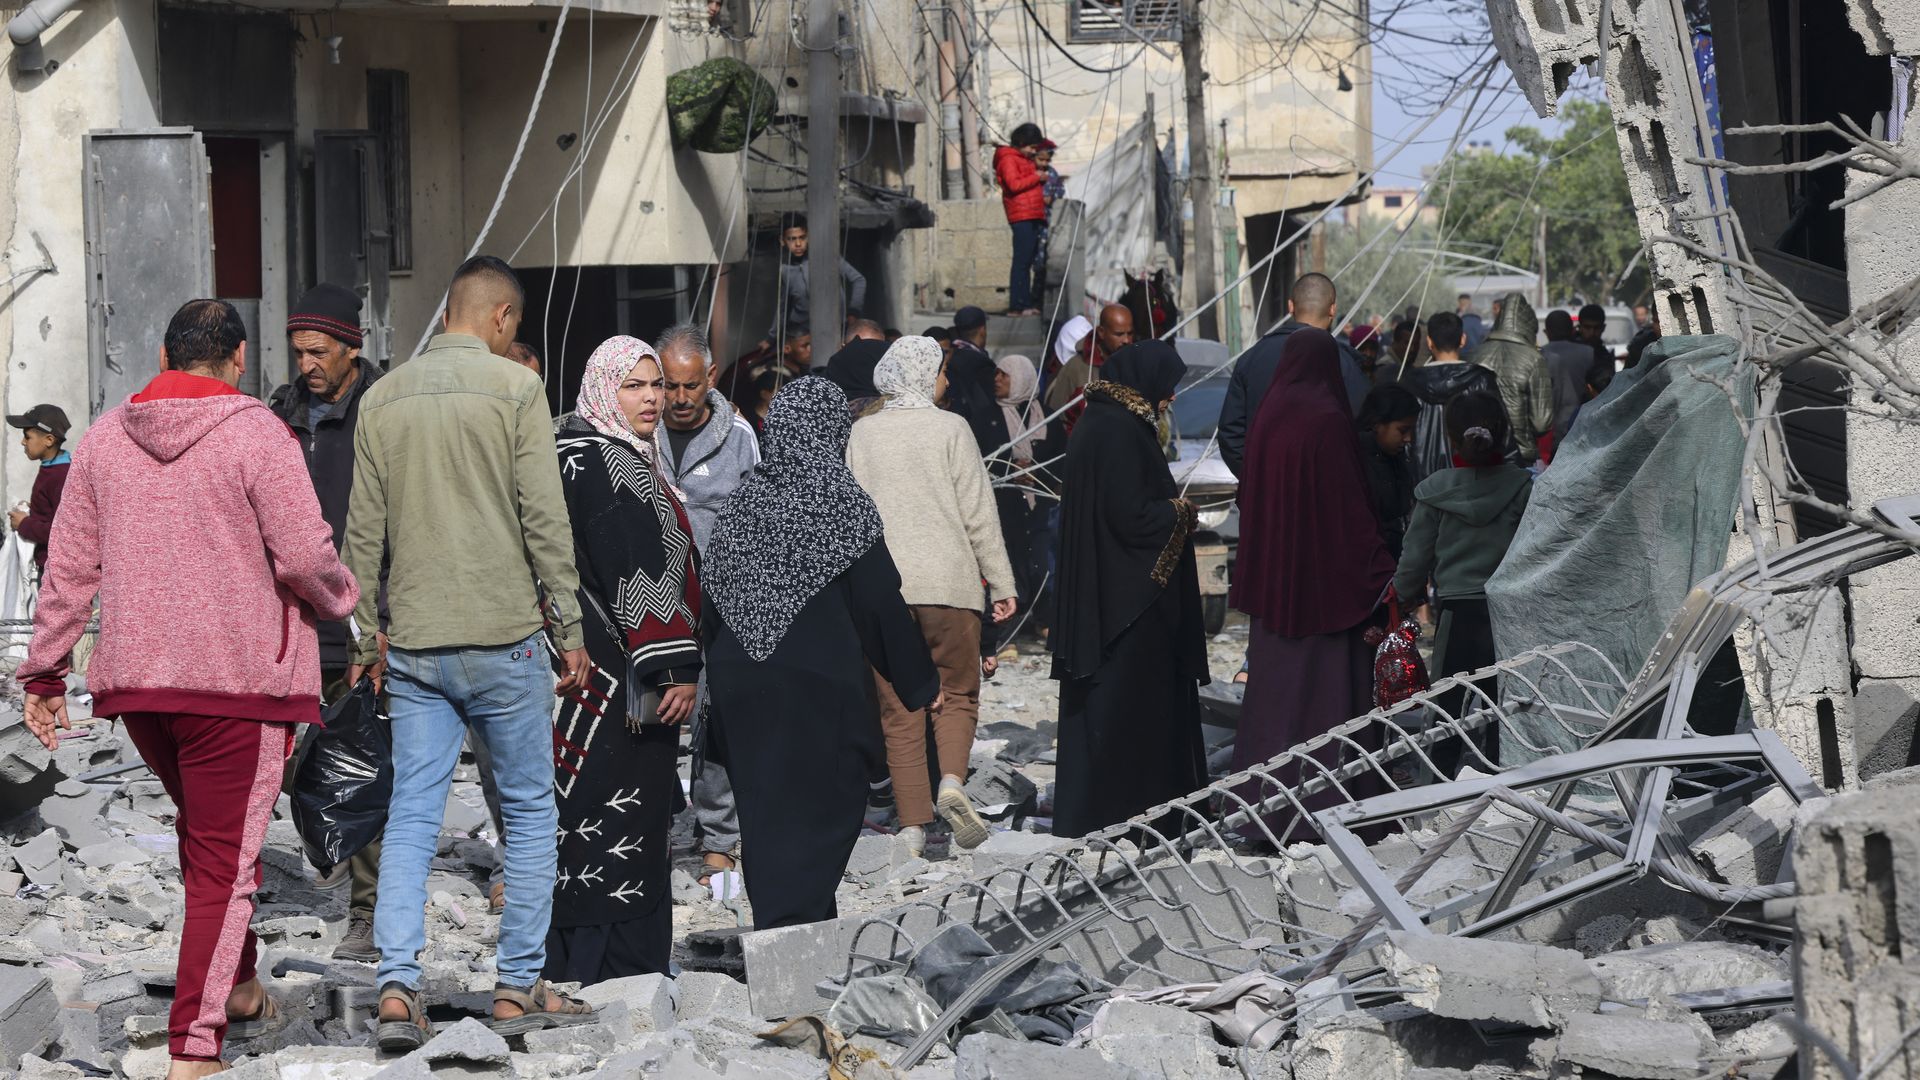 Palestinians inspect the rubble of buildings damaged during Israeli bombardment in Rafah. Photo: Said Khatib/AFP via Getty Images